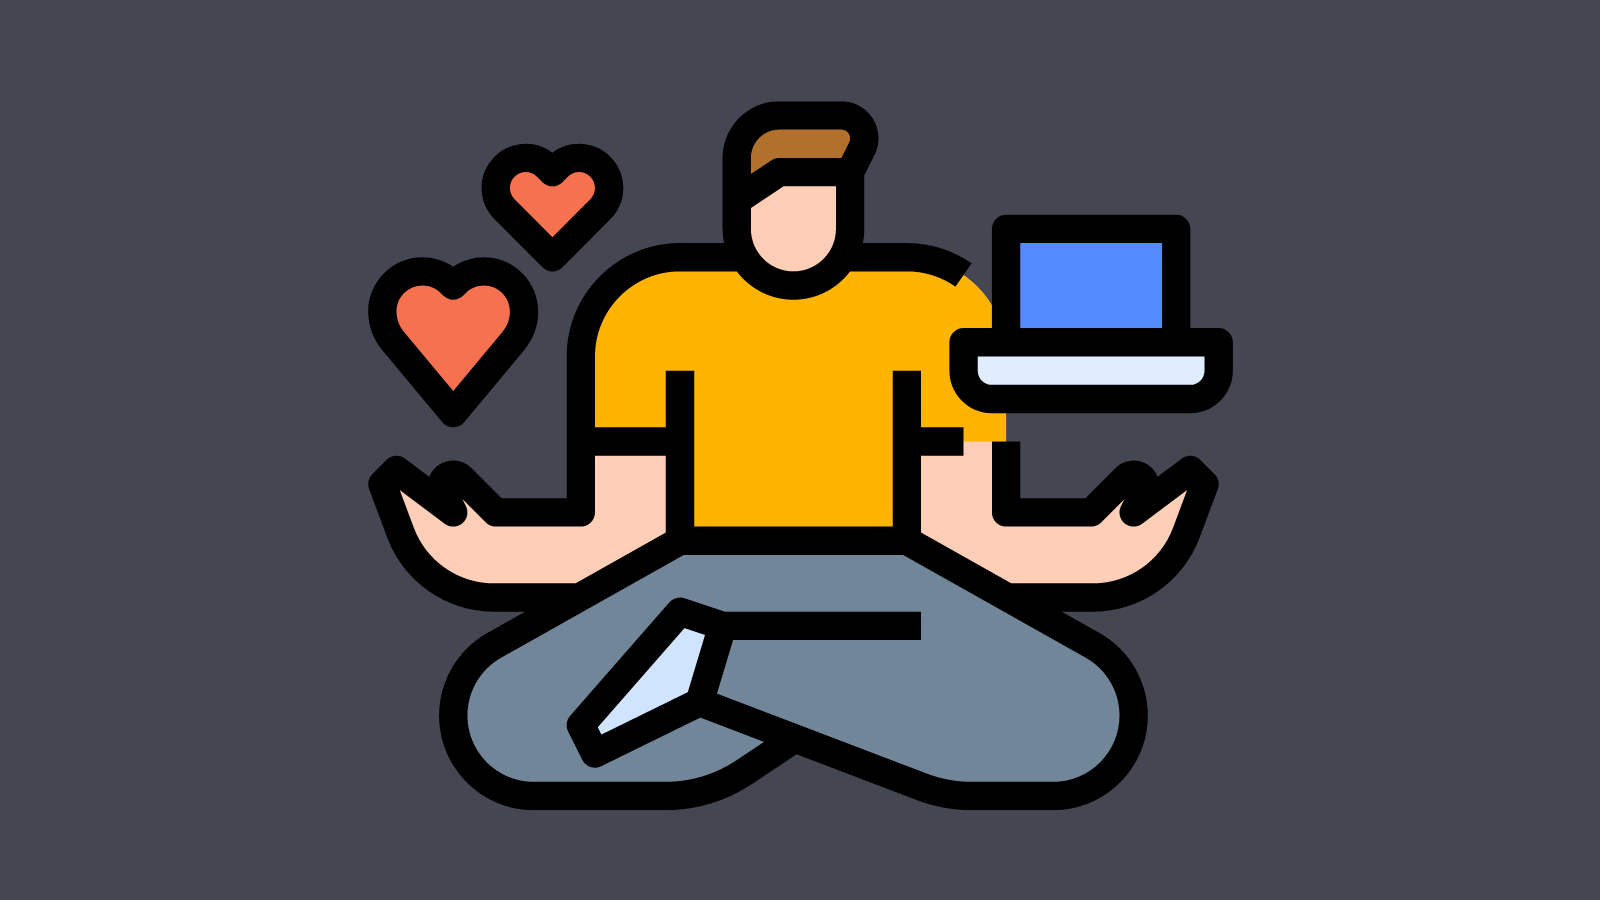 A person sitting cross-legged with a laptop in one hand and a heart in the other